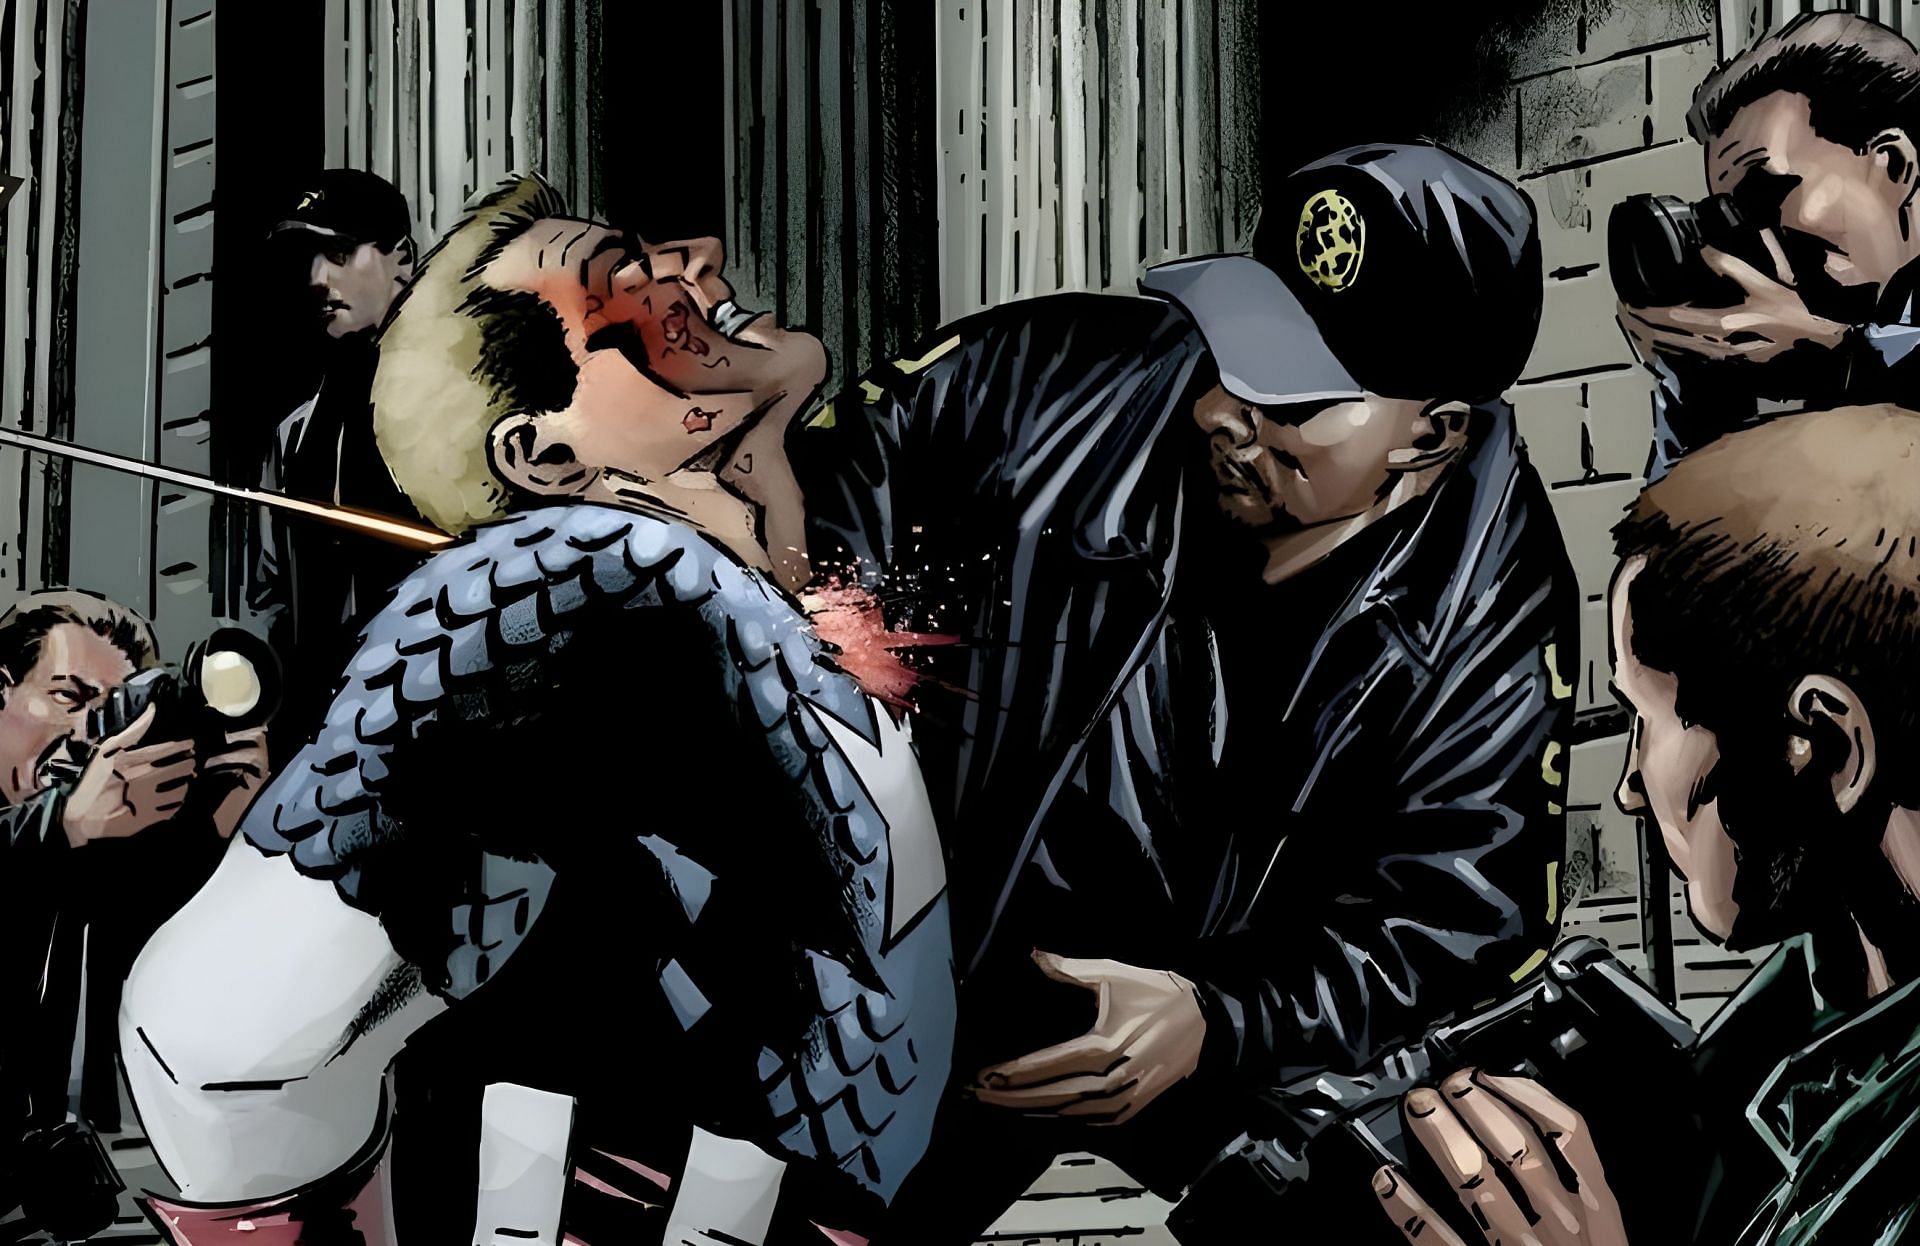 Captain America, one of the most iconic characters in Marvel Comics, met his demise in a storyline titled &quot;The Death of Captain America.&quot; (Image via Marvel)